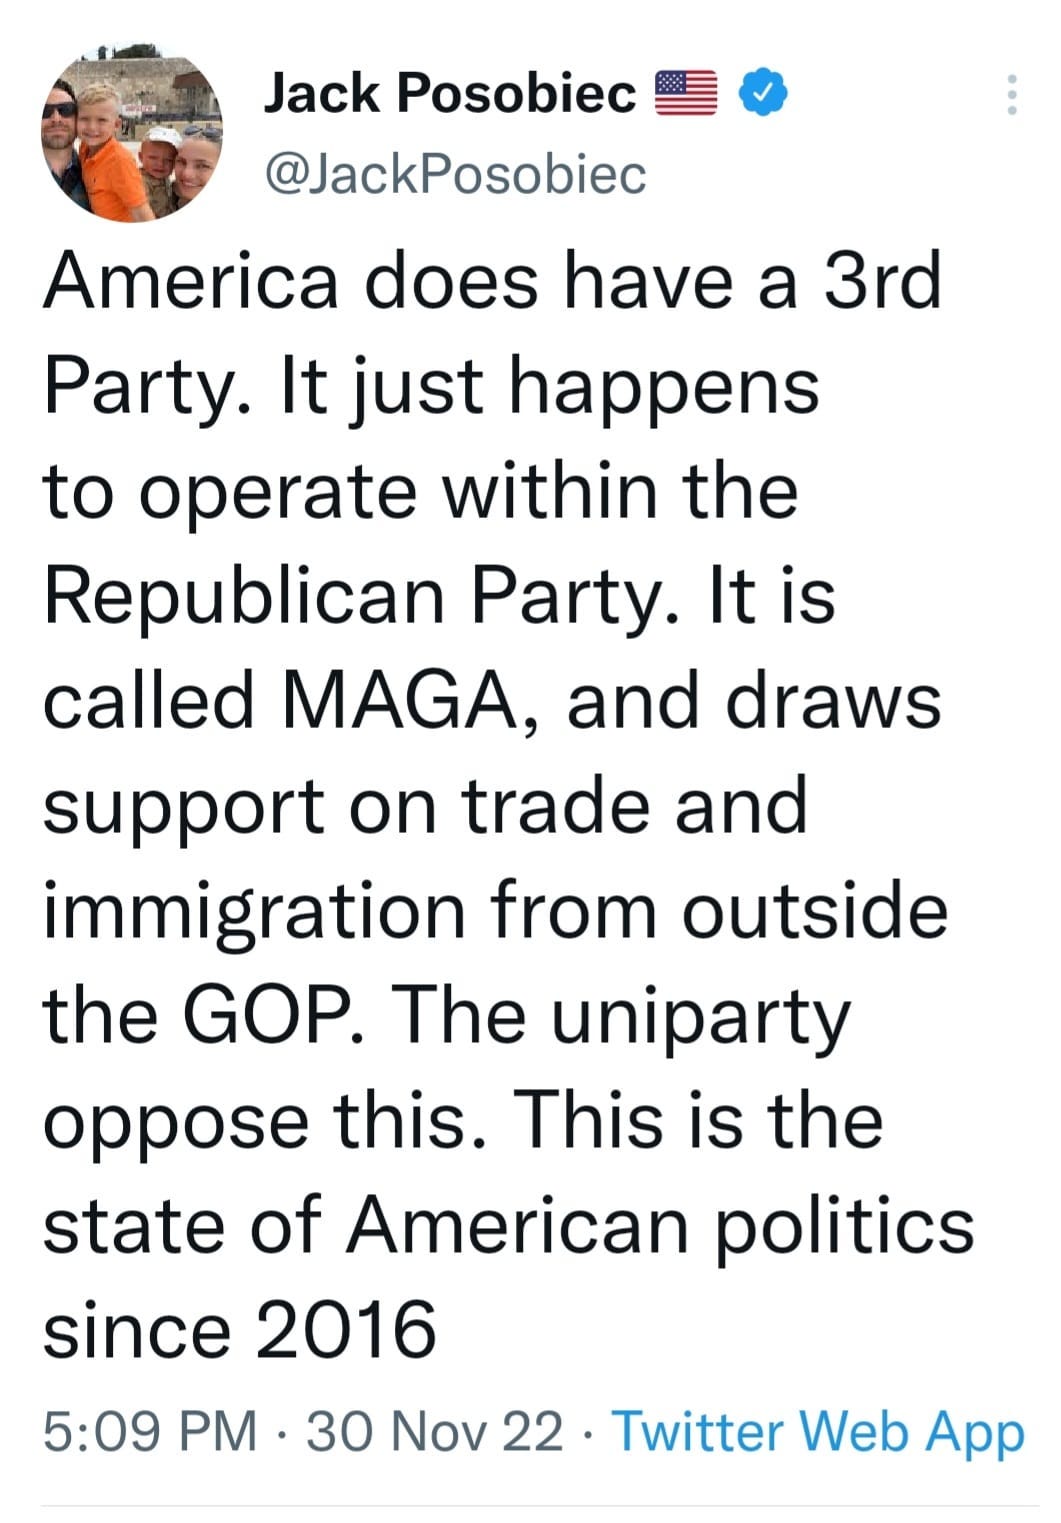 May be an image of 2 people and text that says 'Jack Posobiec @JackPosobiec America does have a 3rd Party. It just happens to operate within the Republican Party. It is called MAGA, and draws support on trade and immigration from outside the GOP. The uniparty oppose this. This is the state of American politics since 2016 5:09 PM 30 Nov 22 Twitter Web App'